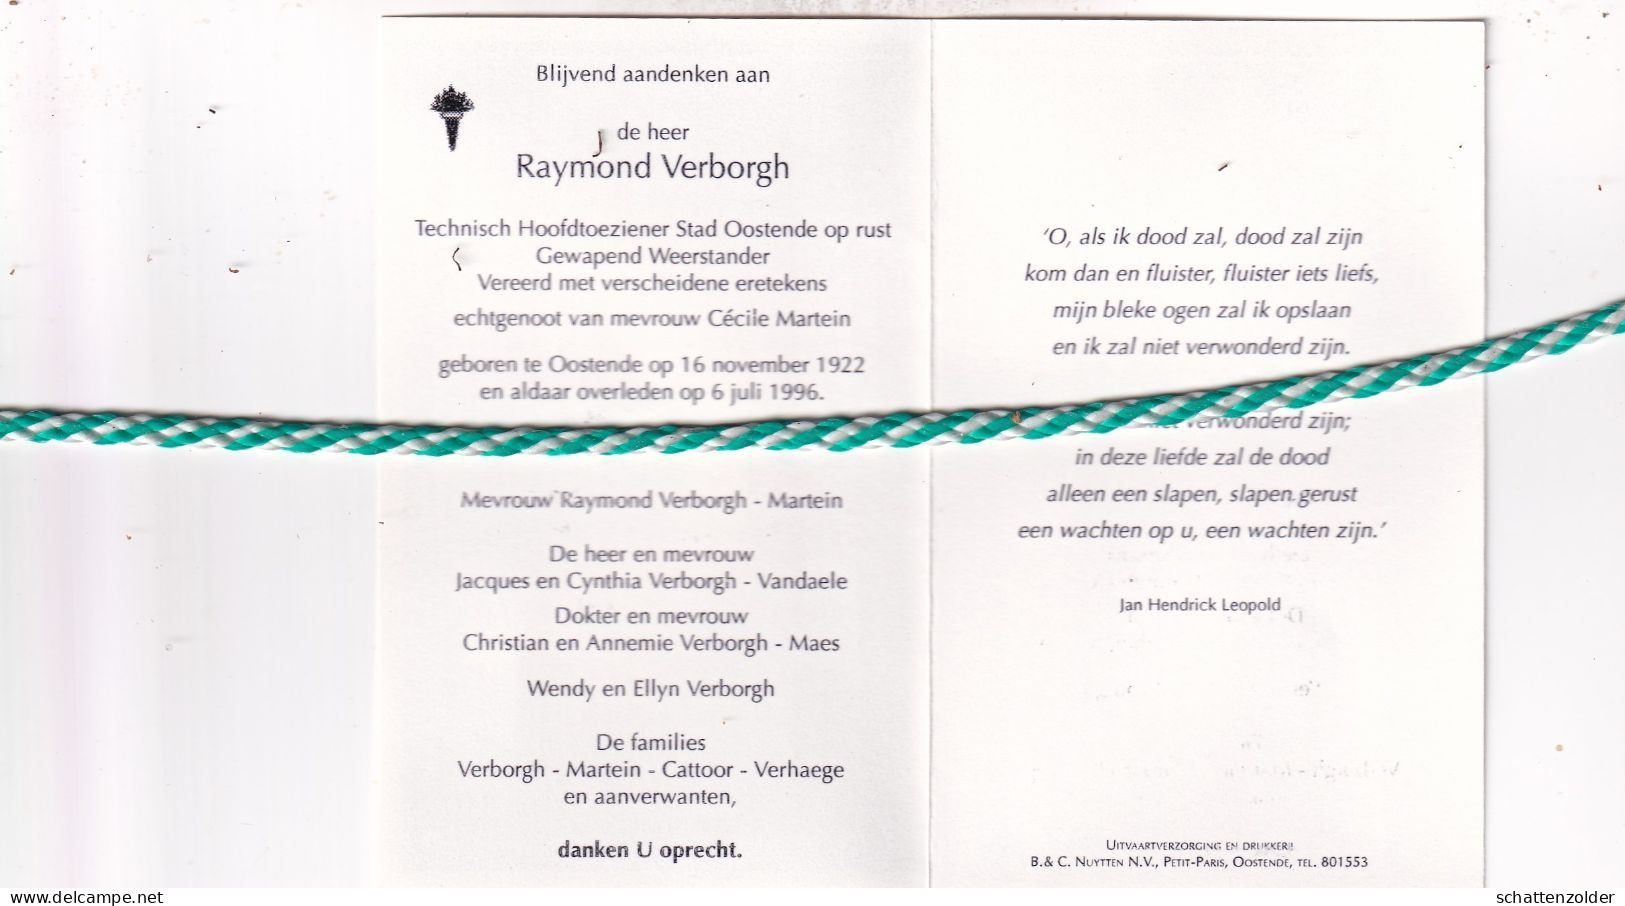 Raymond Verborgh-Martein, Oostende 1922, 1996 - Obituary Notices